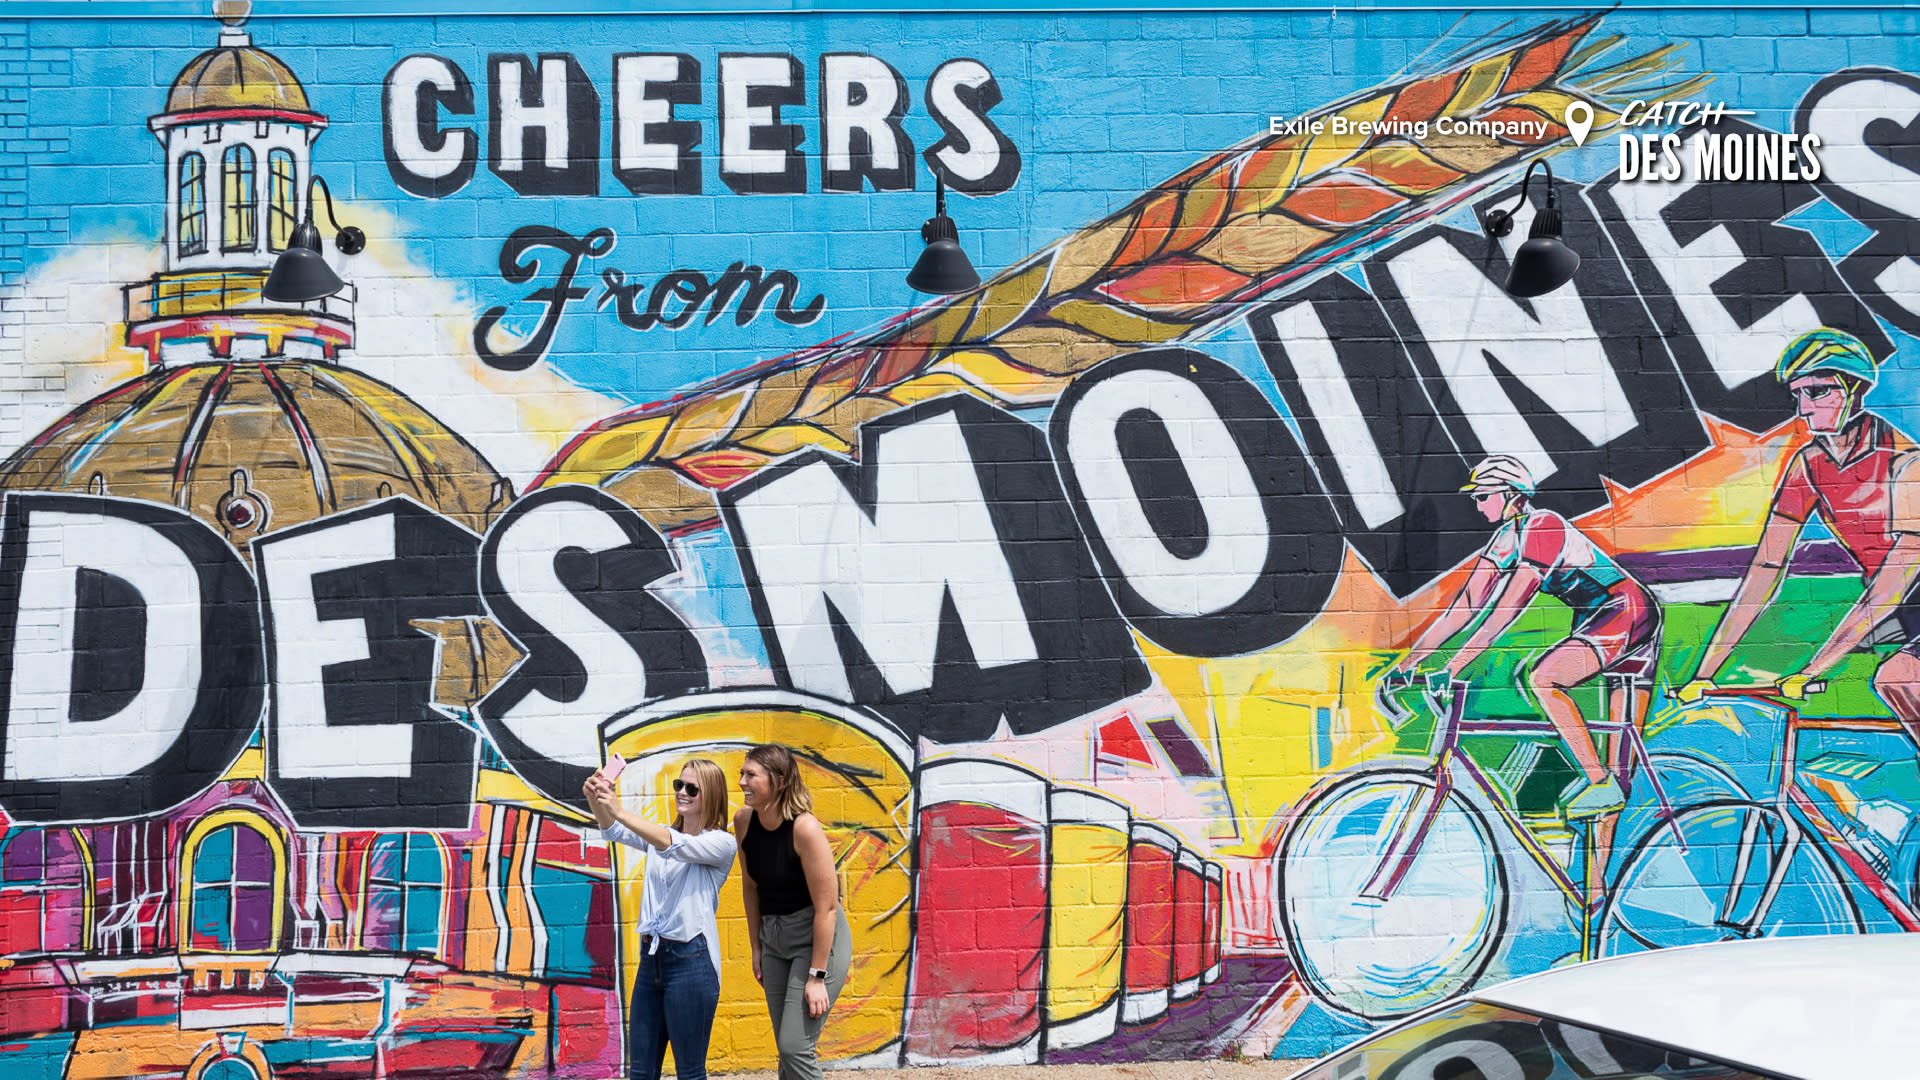 Cheers from Des Moines Wall Mural at Exile Brewing Company Zoom Background